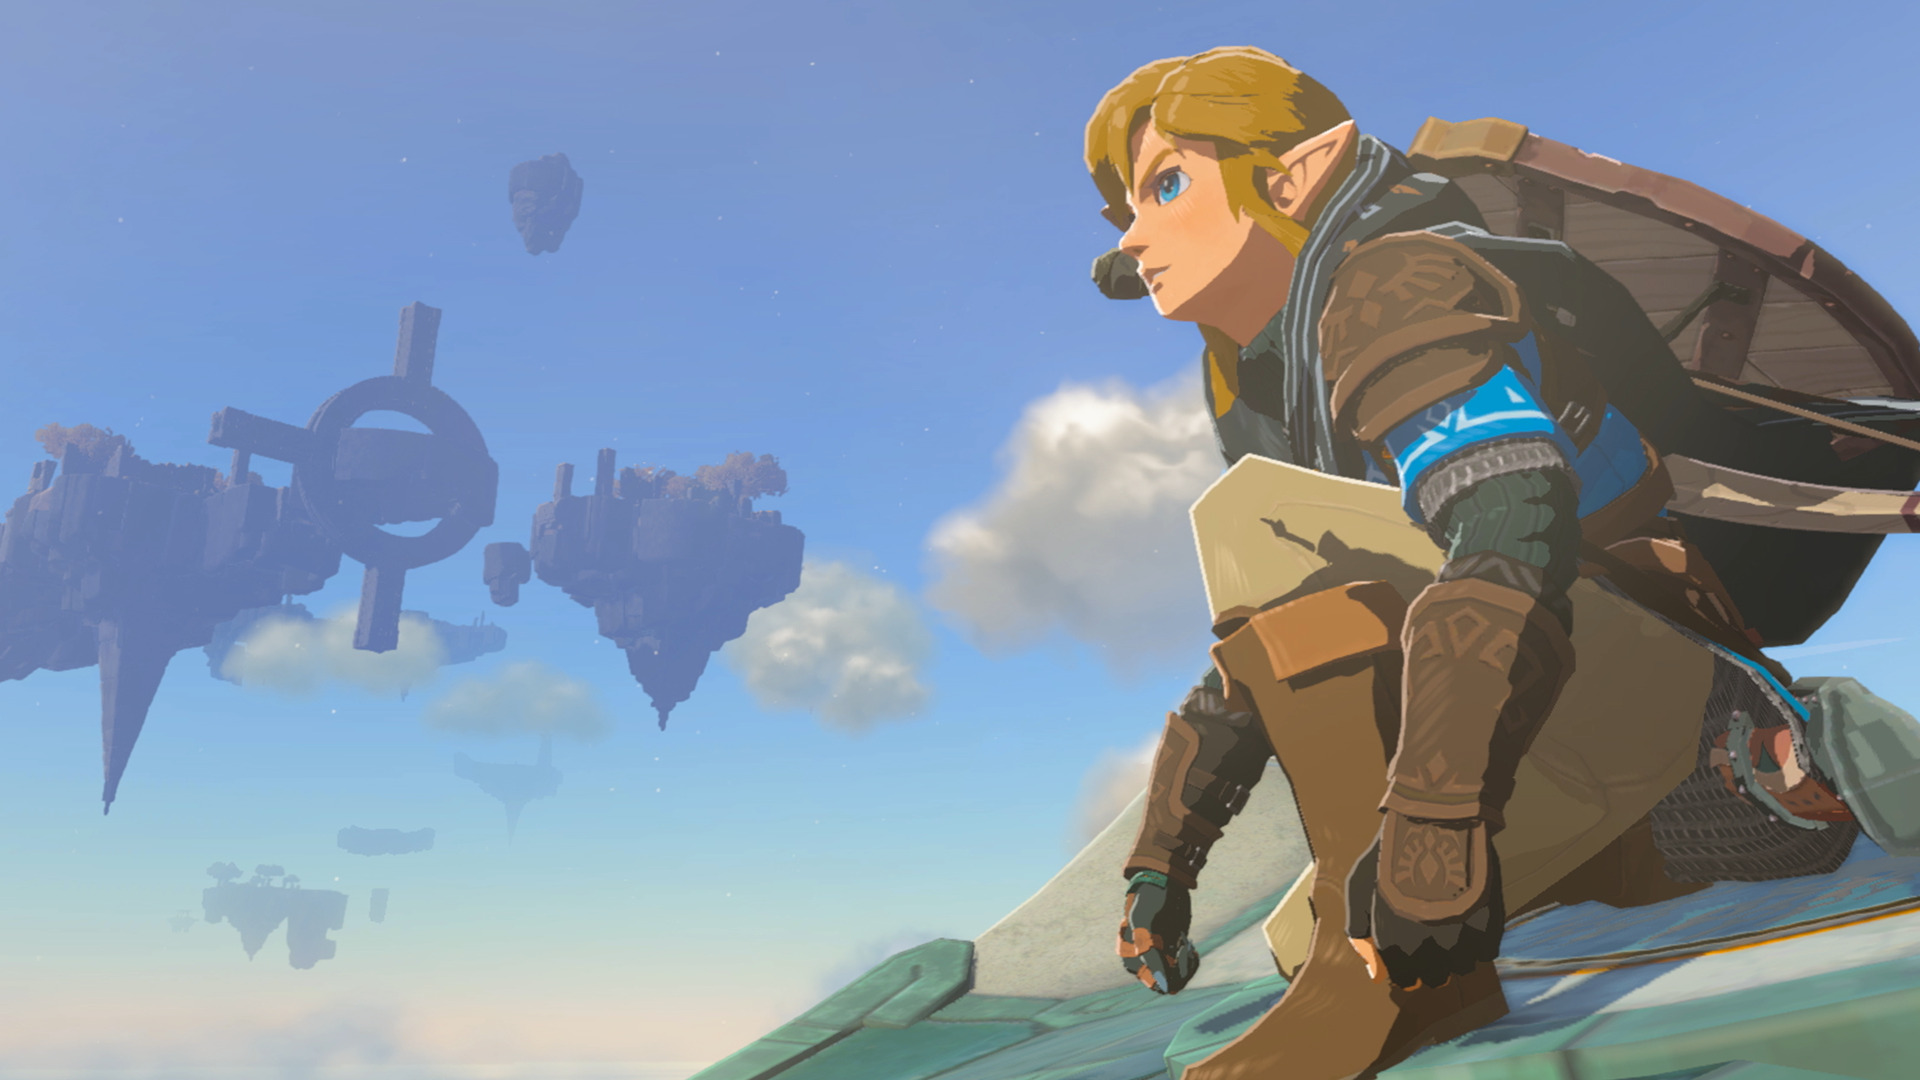 Link gliding in Tears of the Kingdom.